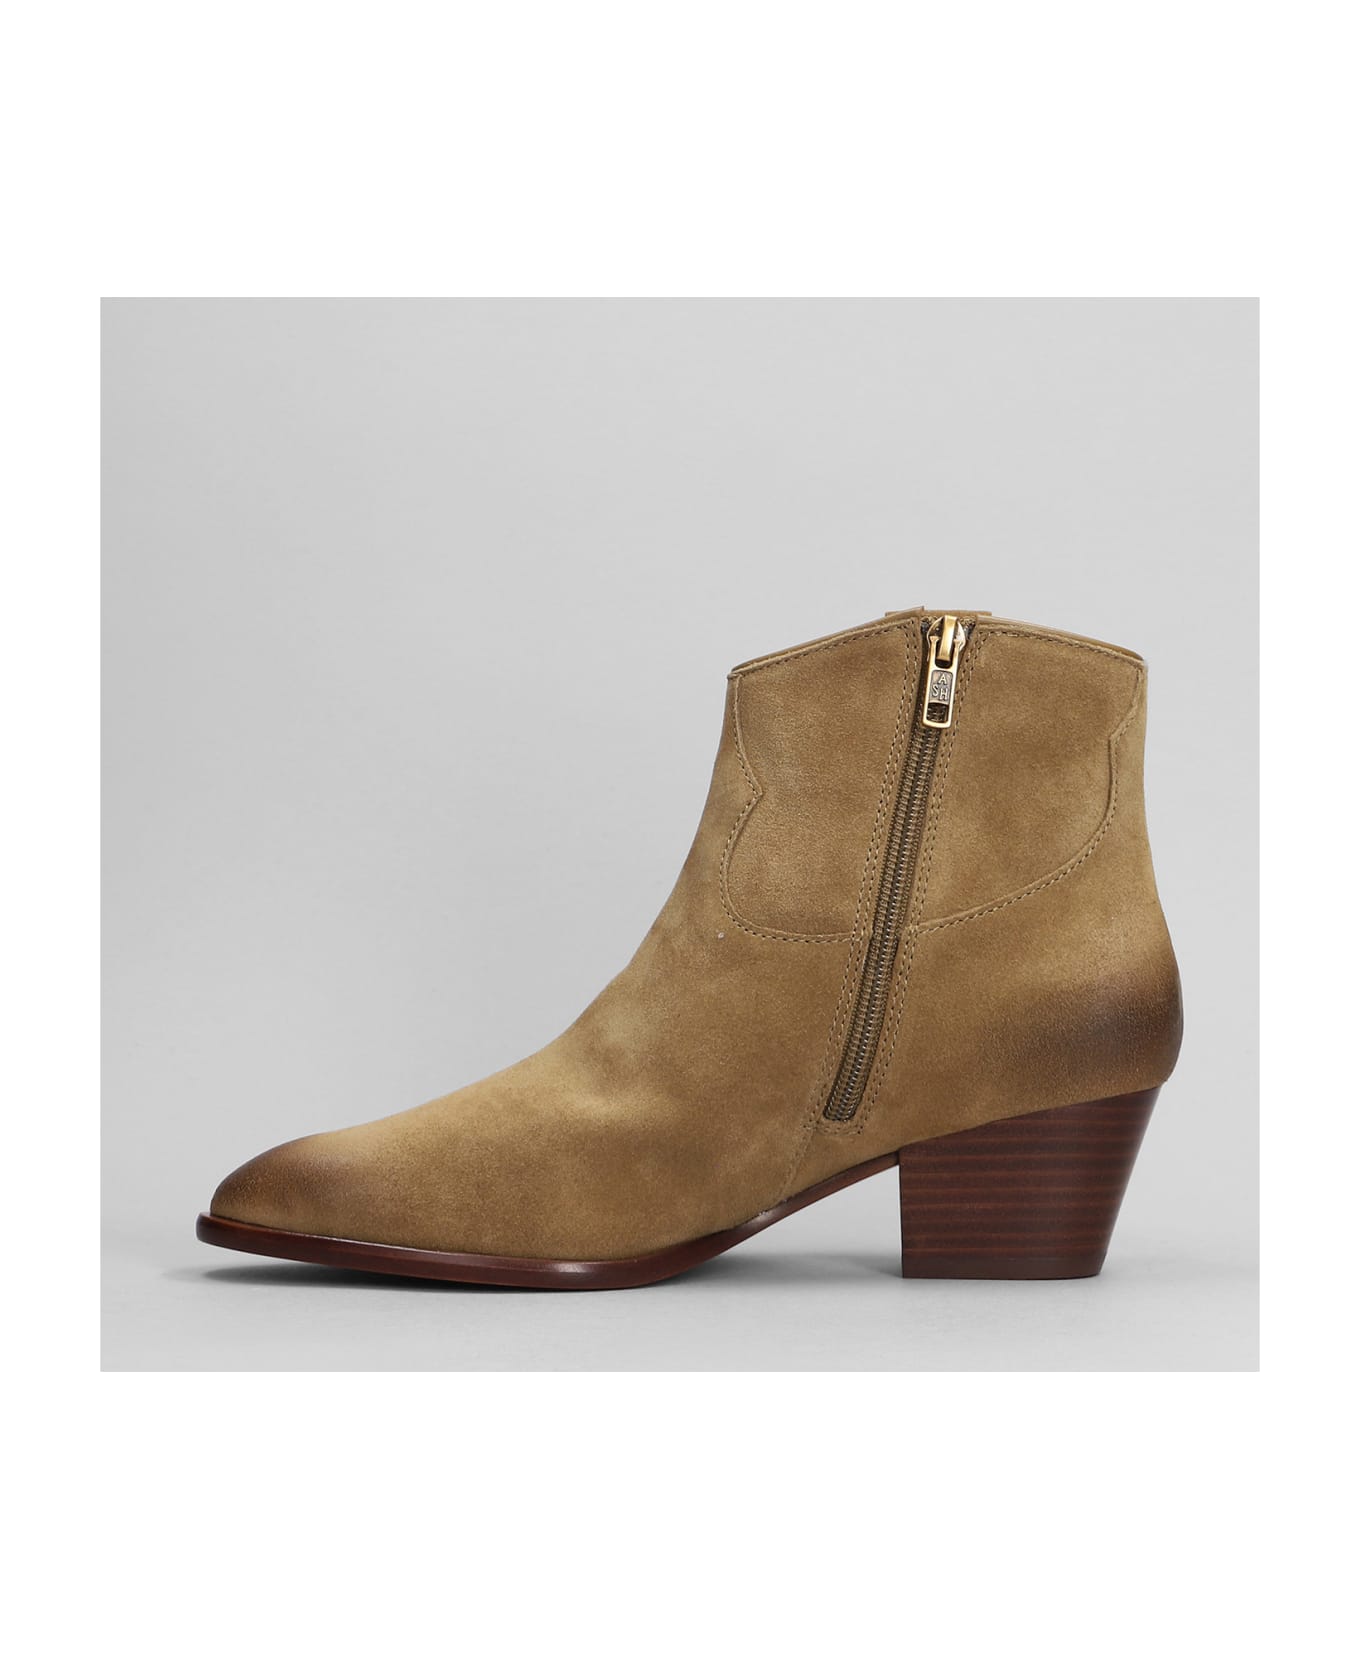 Ash Fame Texan Ankle Boots In Brown Suede - brown ブーツ